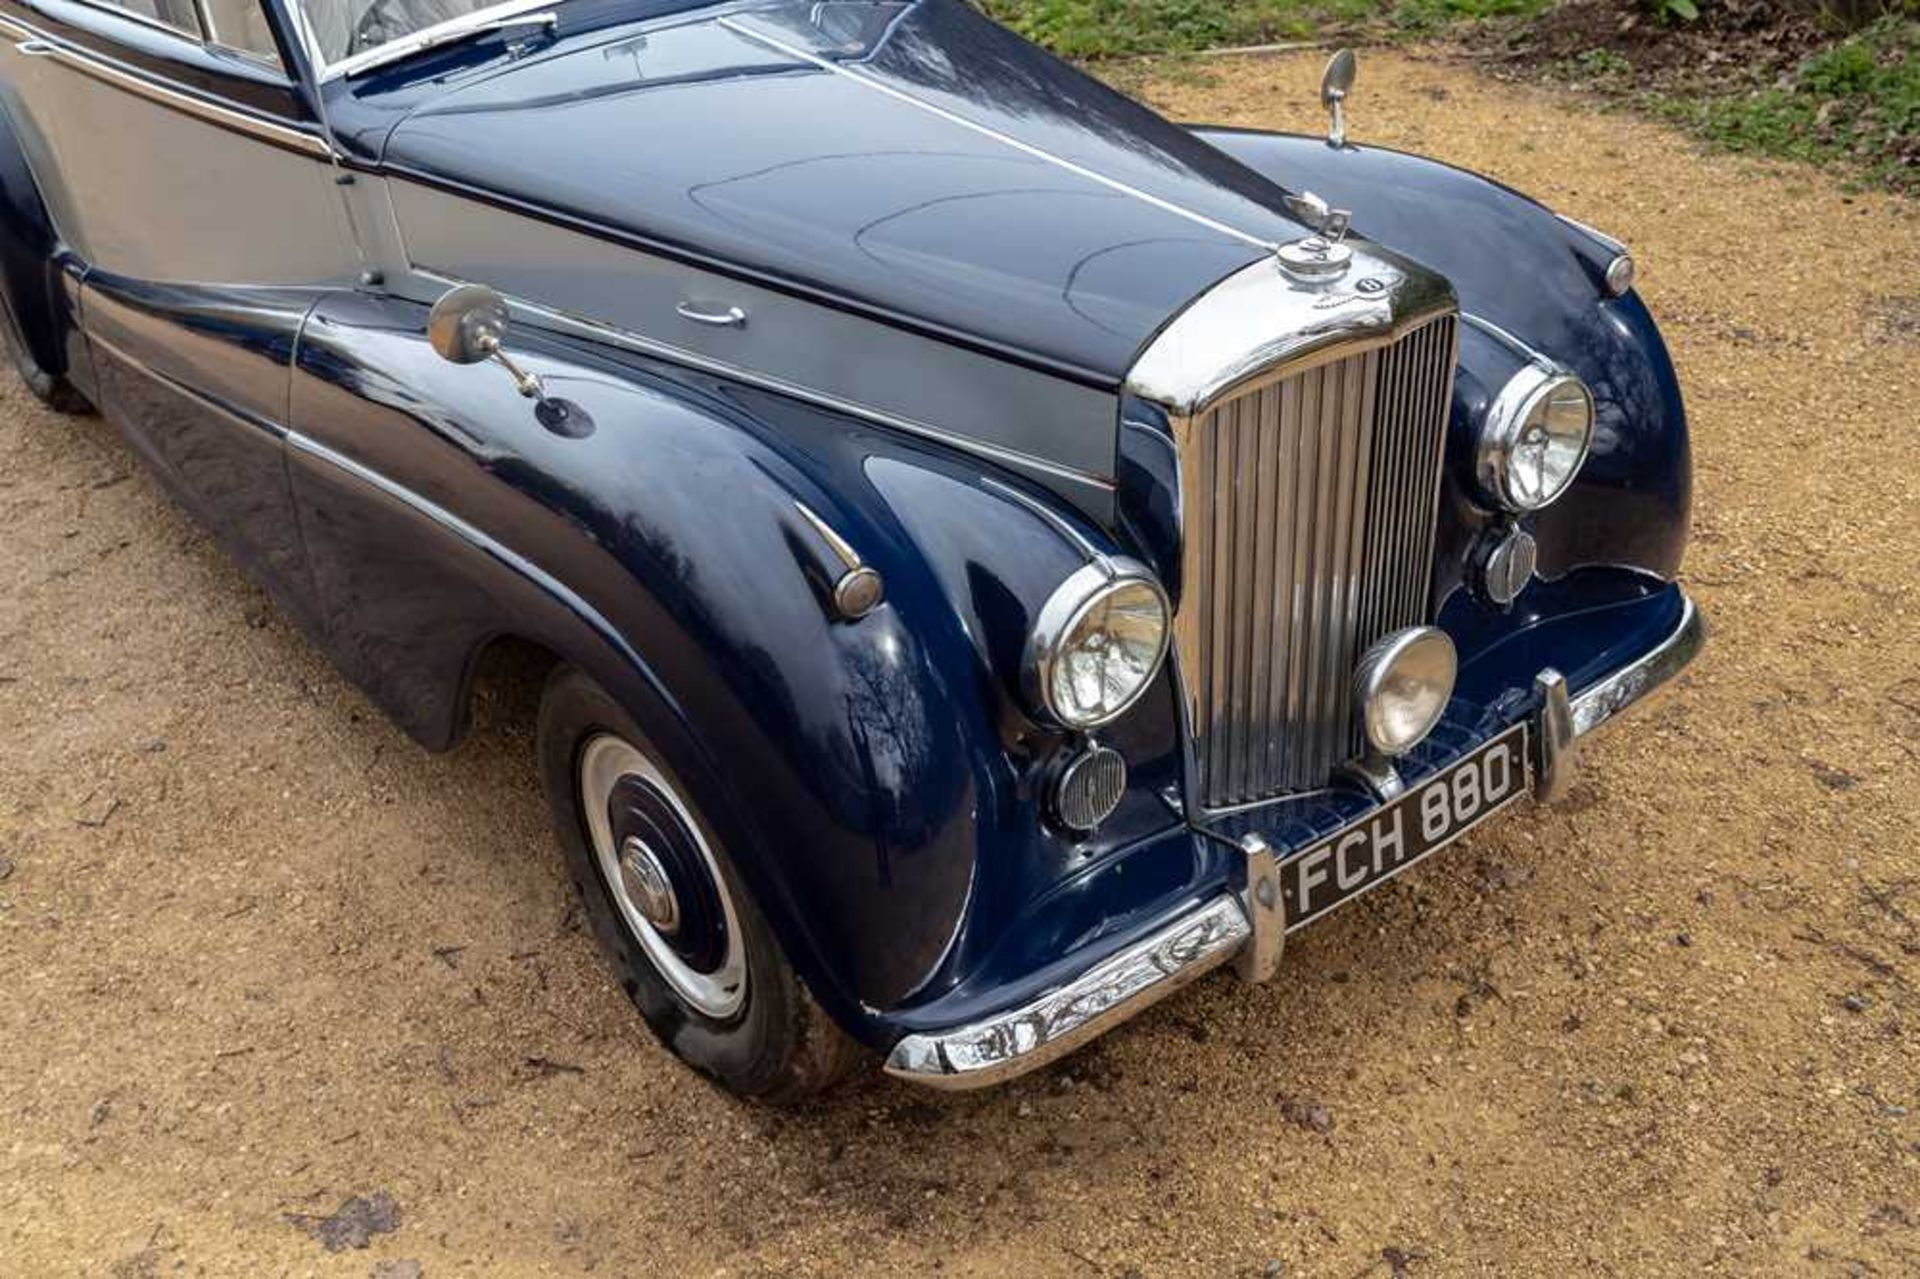 1954 Bentley R-Type Park Ward Drophead Coupe 1 of just 9 R-Type chassis clothed to Design 552 - Image 30 of 86